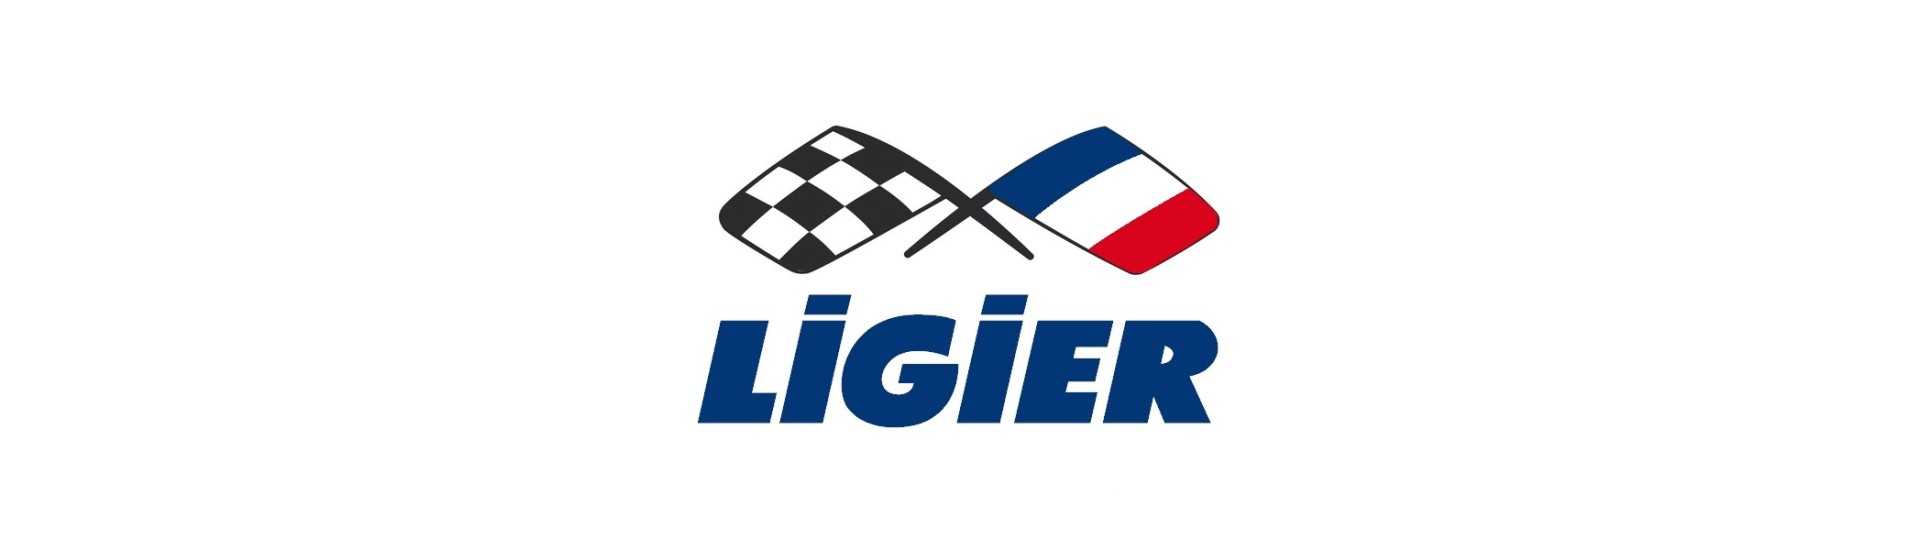 Door stop at the best price for car without a permit Ligier